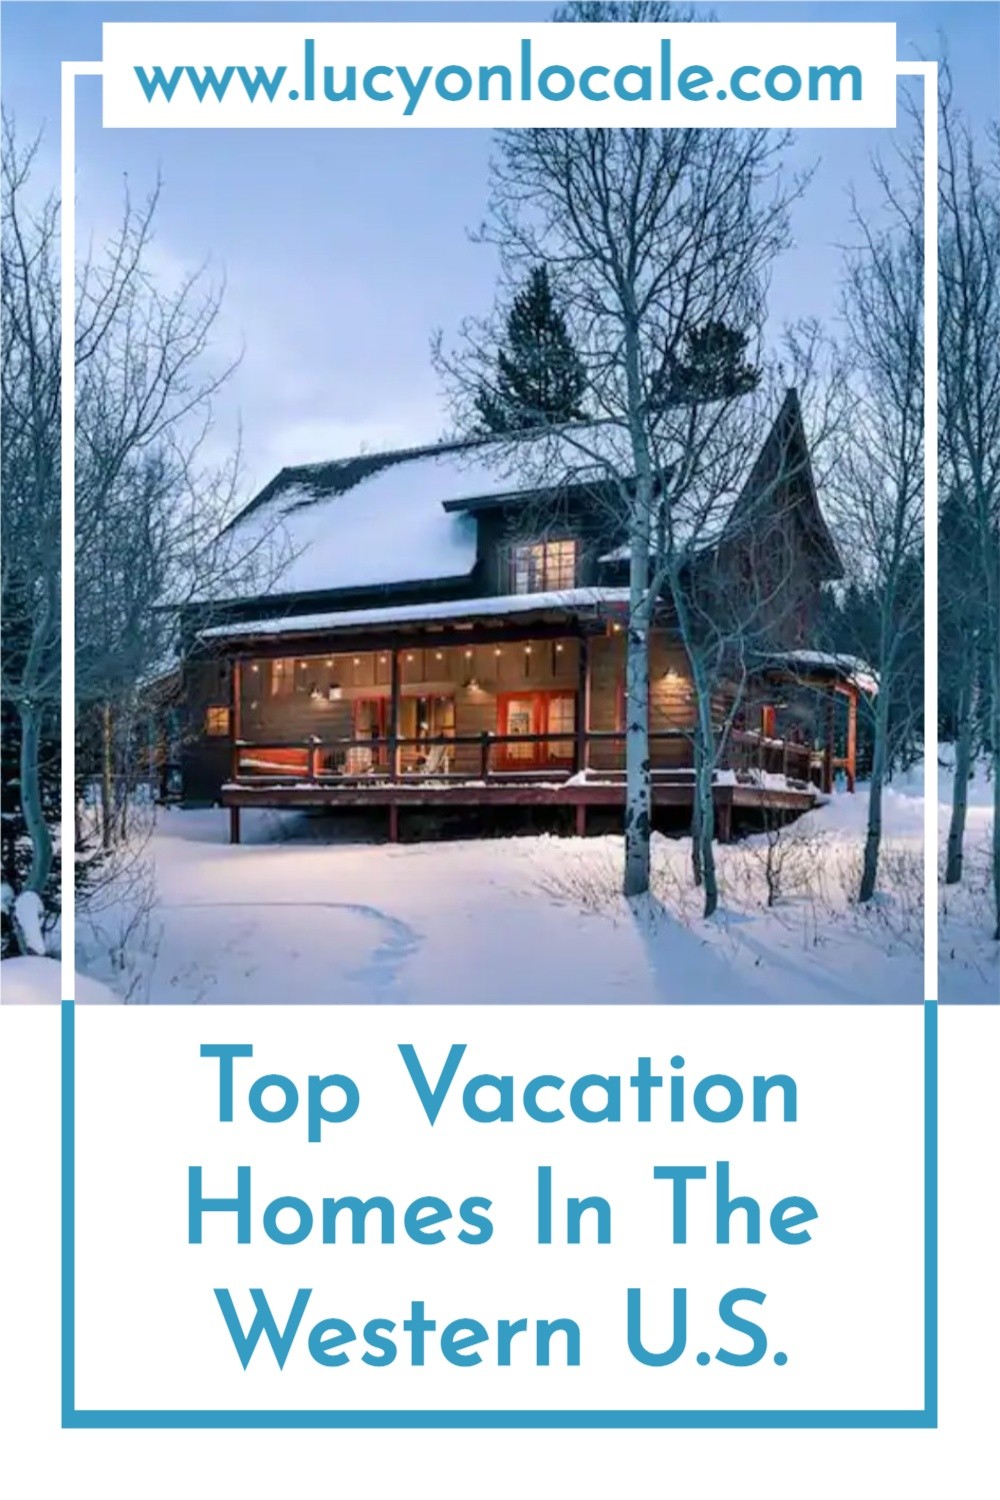 Vacation homes in the Western United States